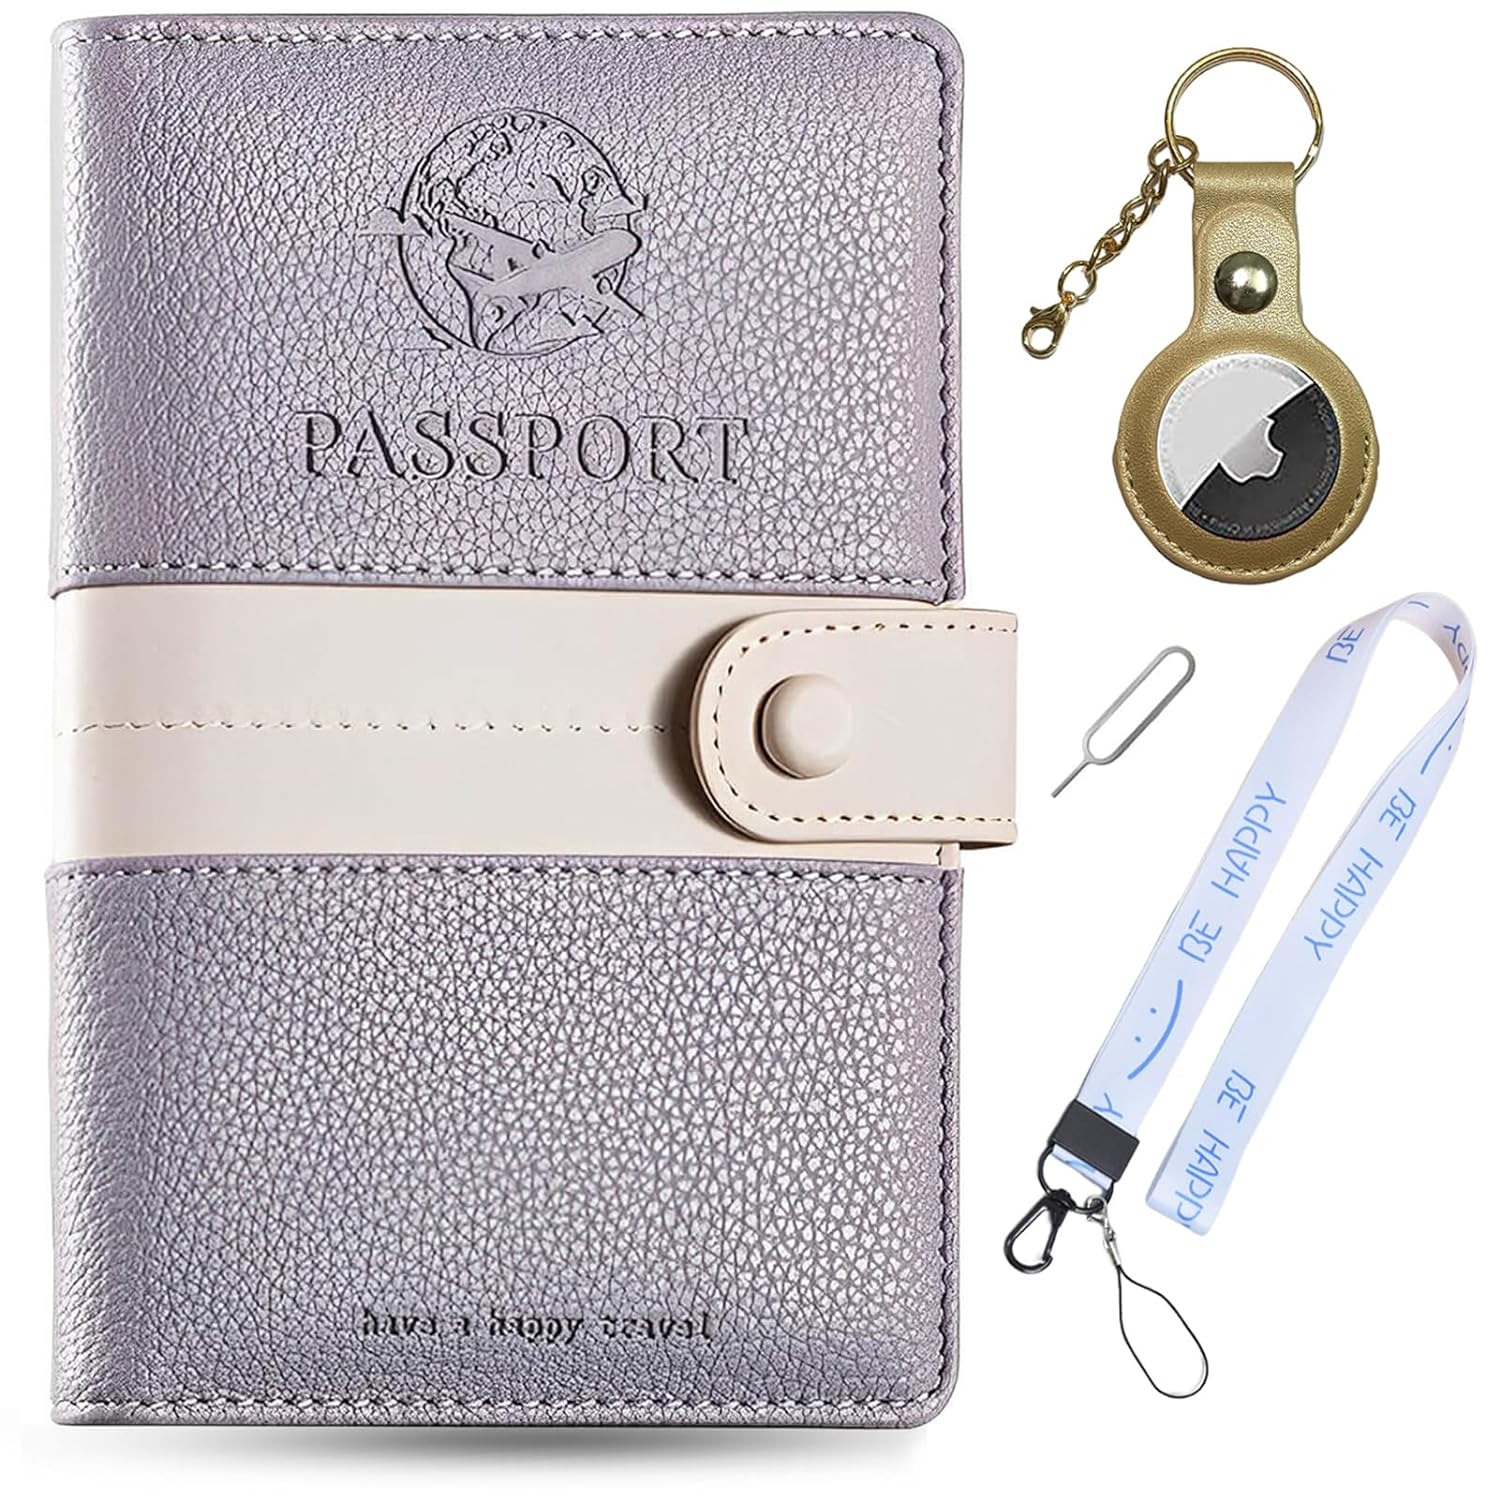 JoyChoi RFID Passport Holder with Airtag, PU Leather Passport Cover, Travel Wallet with Zipper Pocket, Pen Slot & SIM Card Ejector Tool, Essential Travel Accessories, Purple., Purple, Rfid Blocking Family Passport Zip Wallet